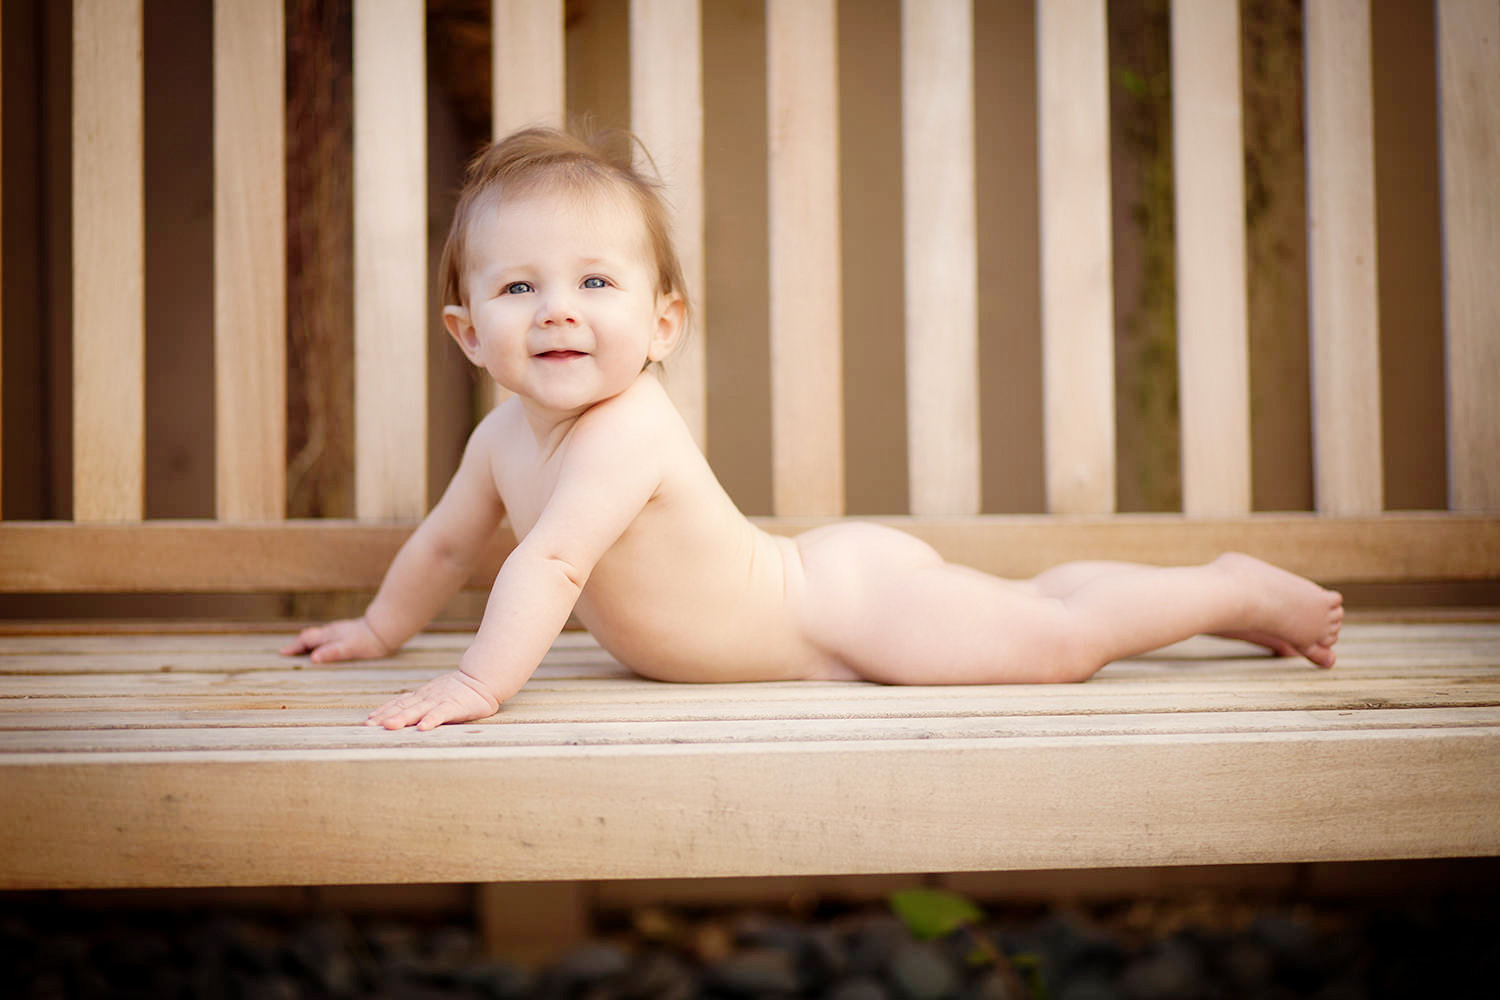 san diego family photography | baby with a big smile on a park bench outdoors